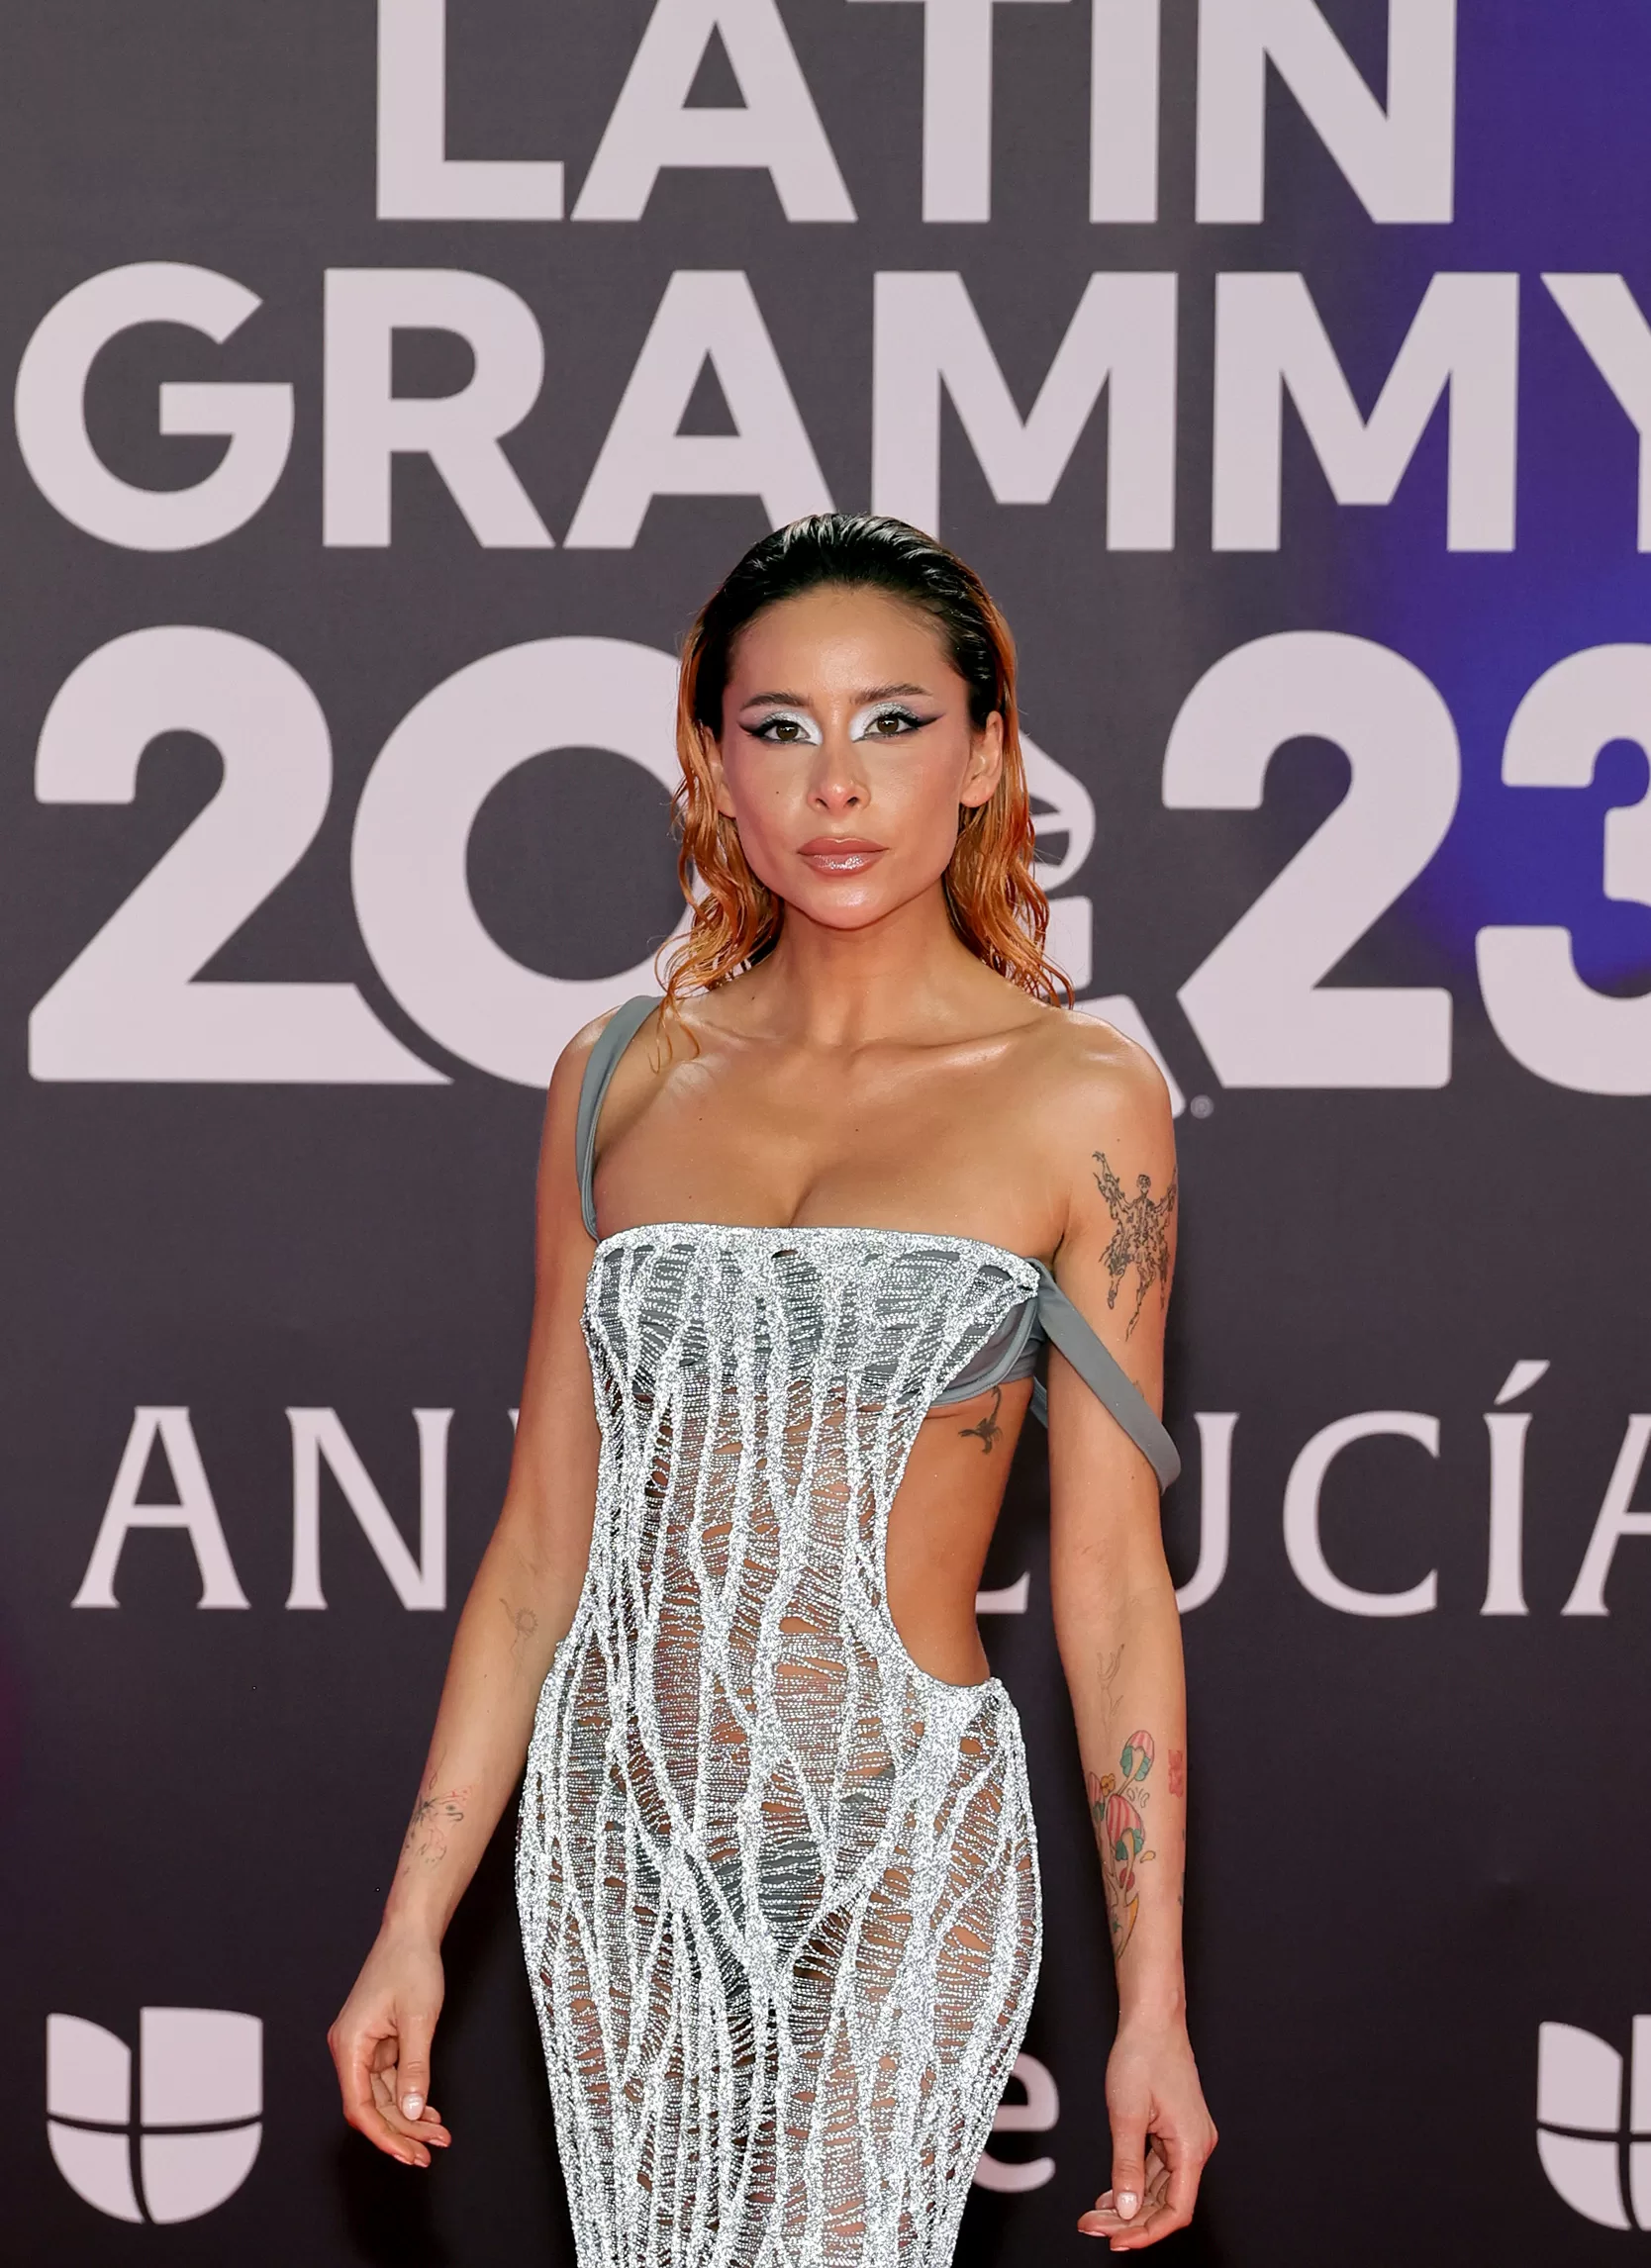 The 24th Annual Latin Grammy Awards   Arrivals